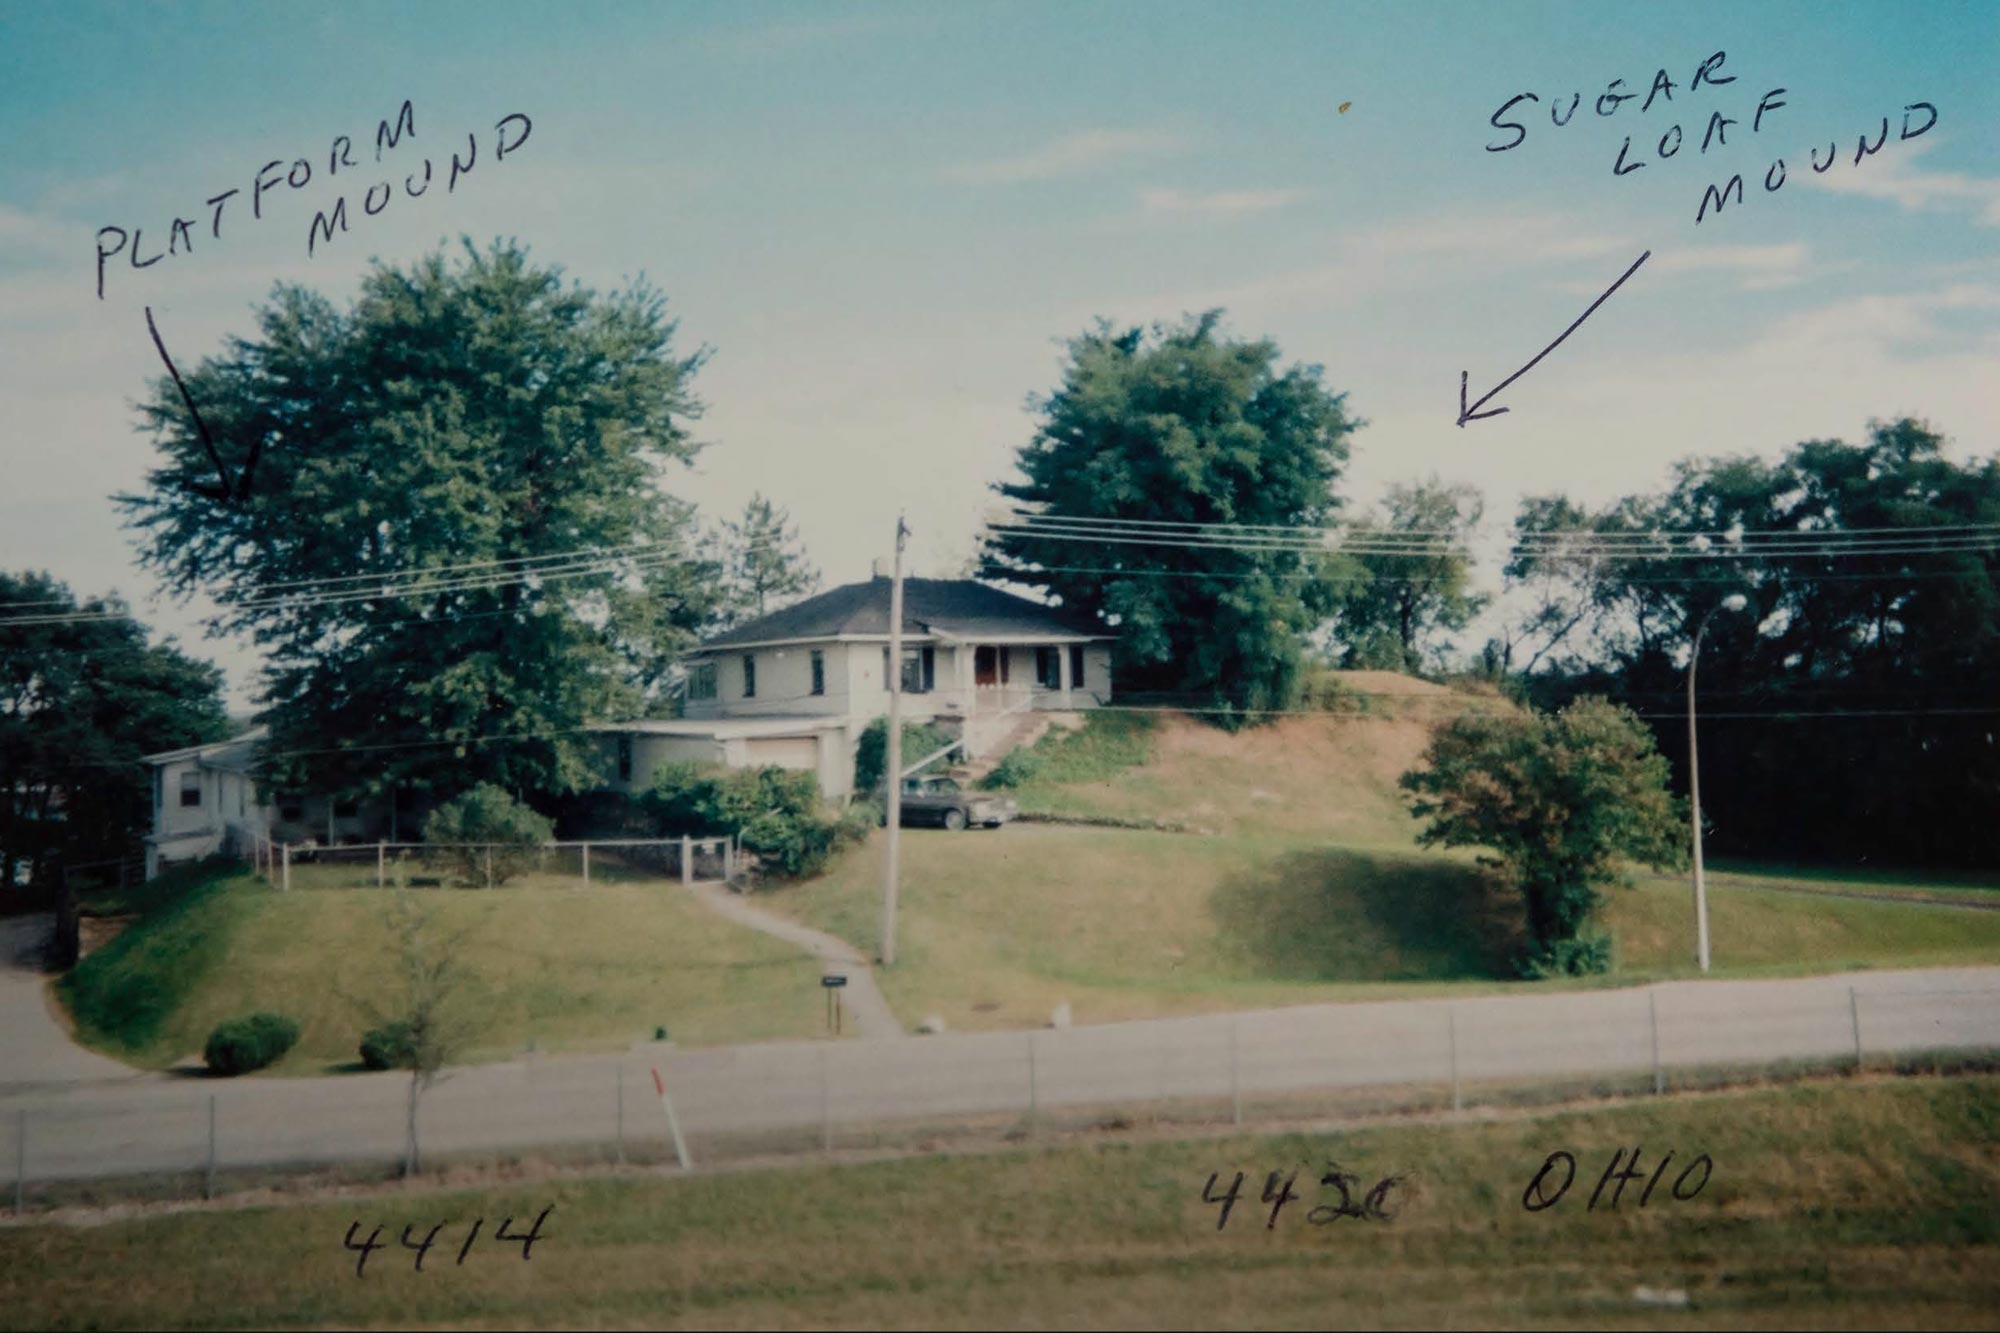 A scrapbook photo of a house between trees on top of raised earth, with handwritten labels stating 